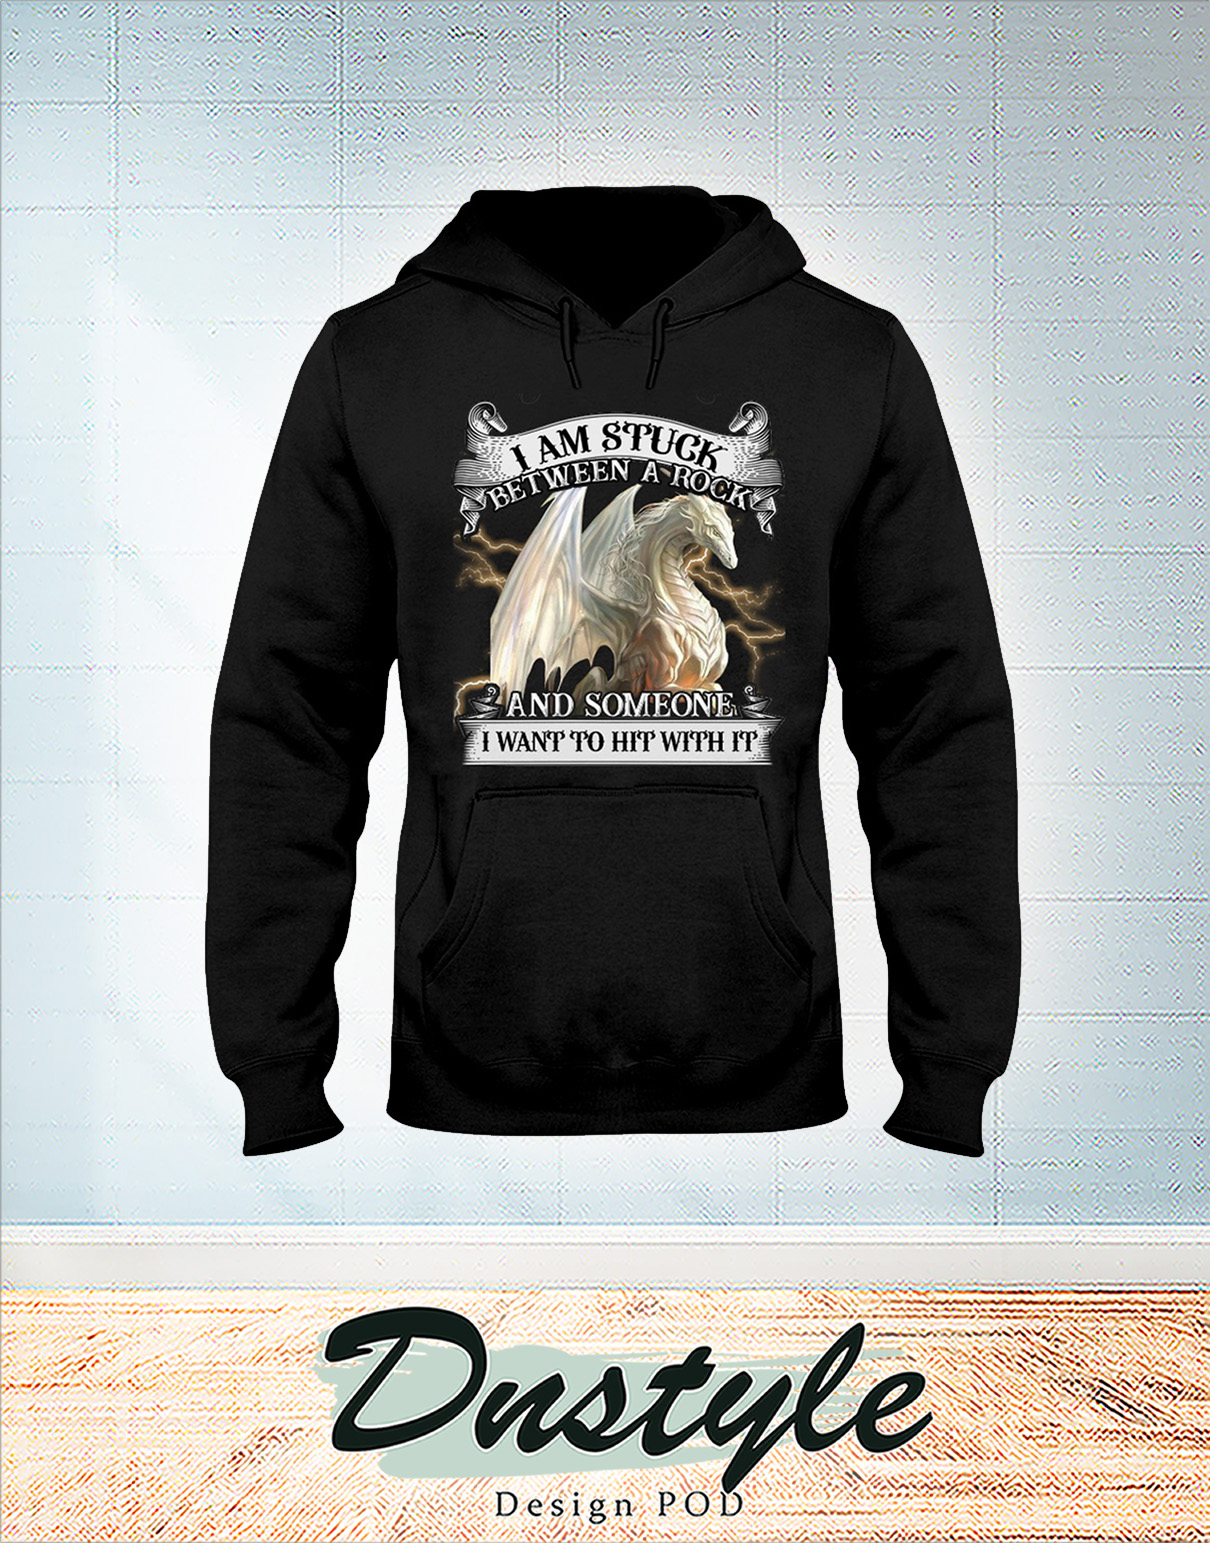 White dragon I am stuck between a rock and someone I want to hit with it hoodie